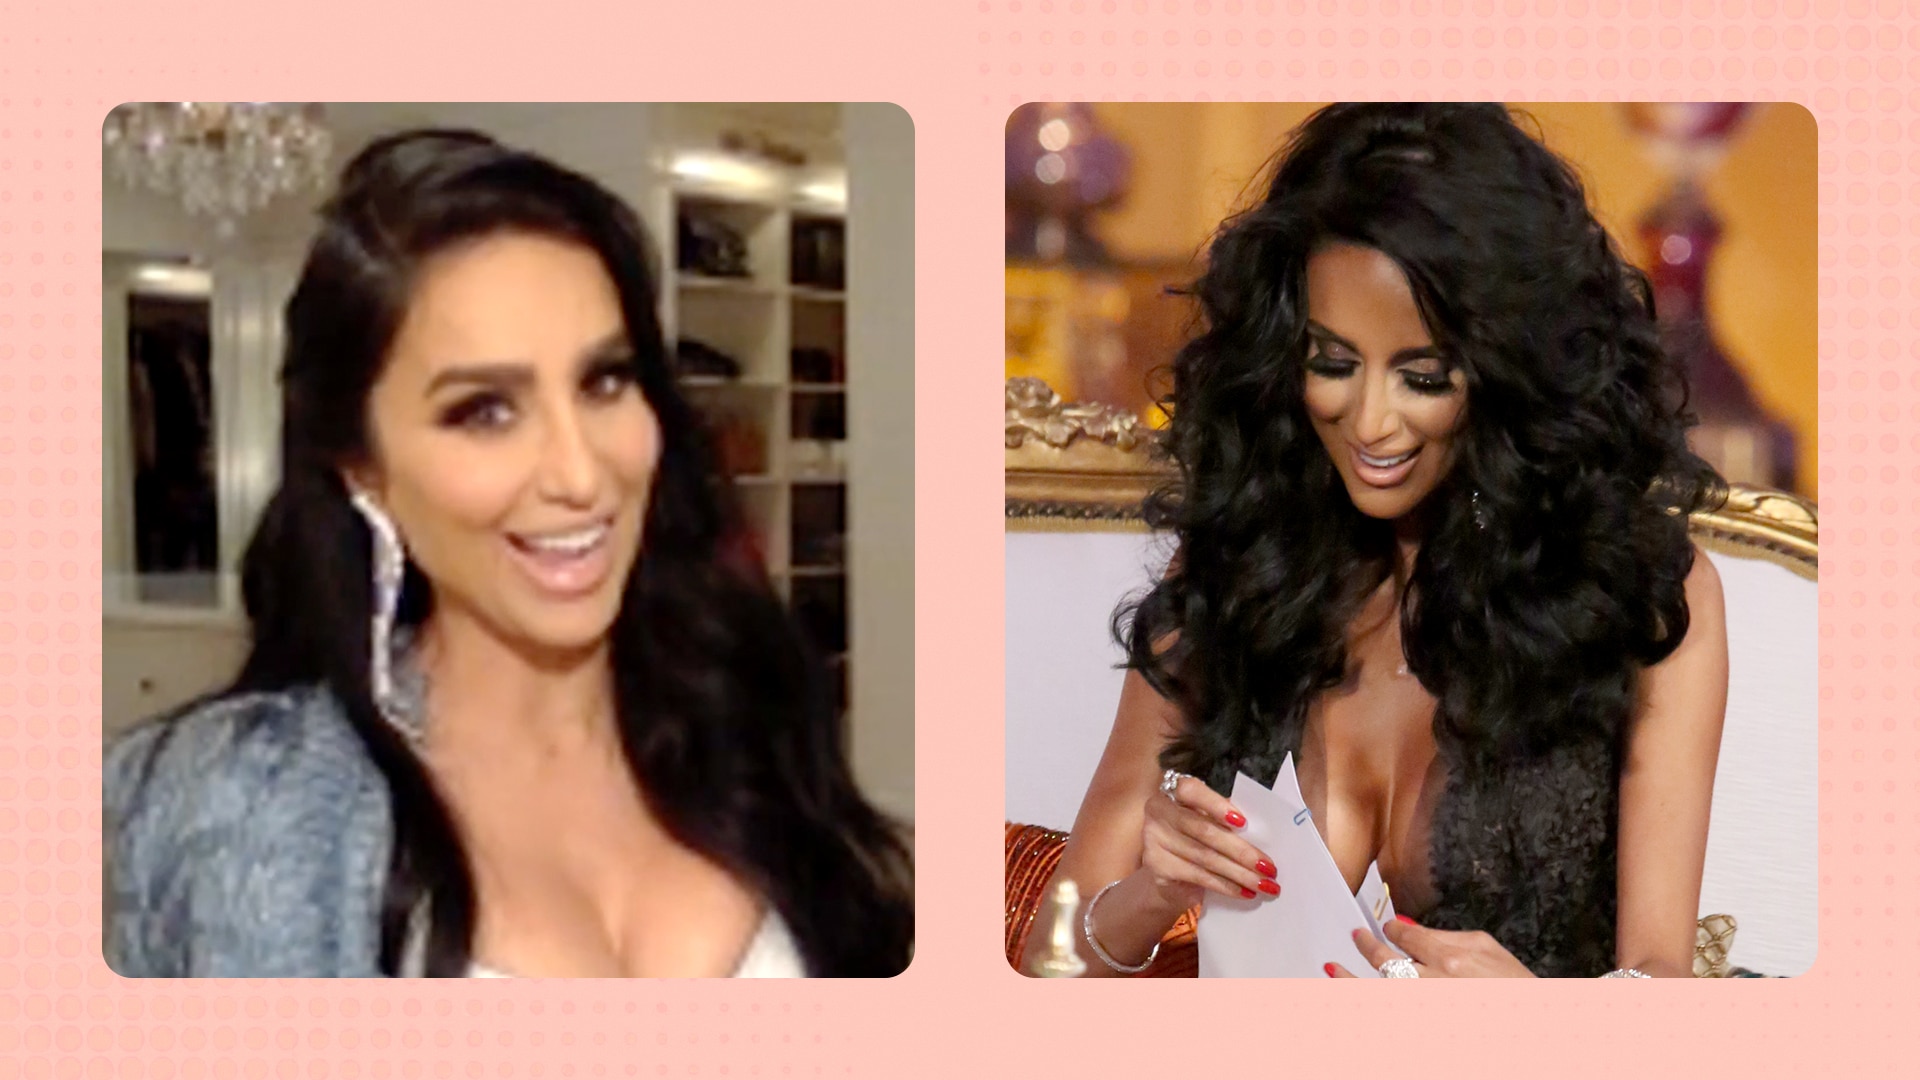 Is Lilly Ghalichi the Reason Most Housewives Bring "Receipts" to Reunions Now?